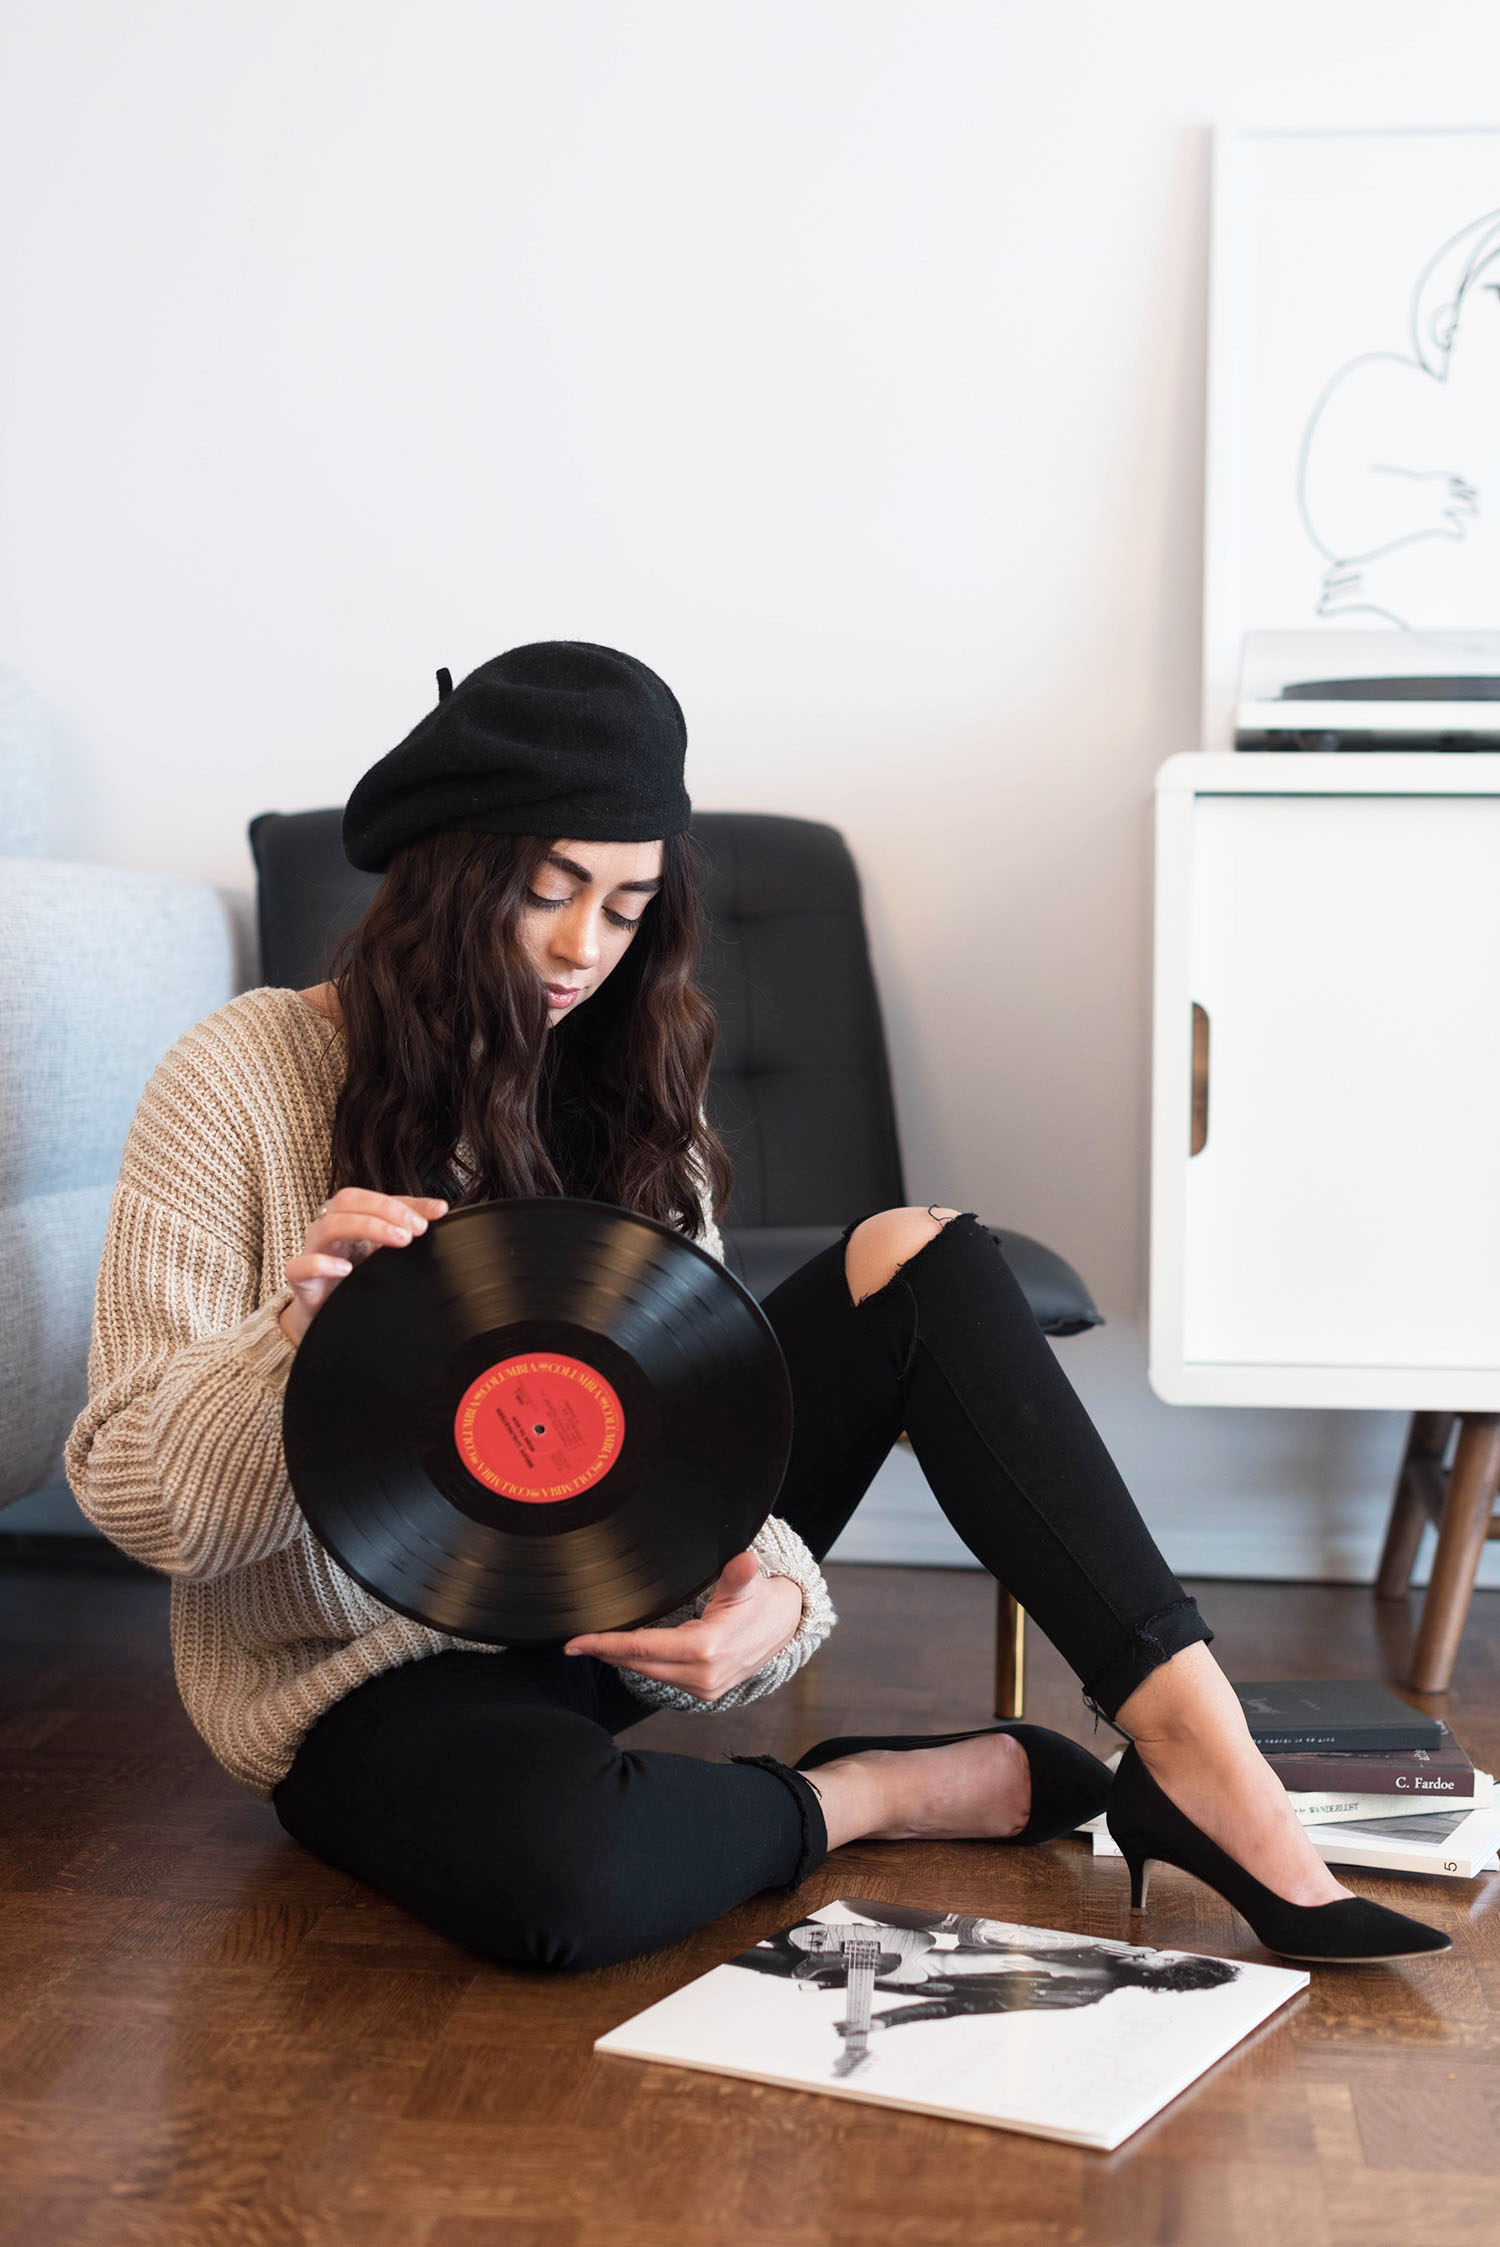 Winnipeg fashion blogger Cee Fardoe of Coco & Vera holds a Bruce Springsteen record wearing J. Crew kitten heels and black Paige jeans